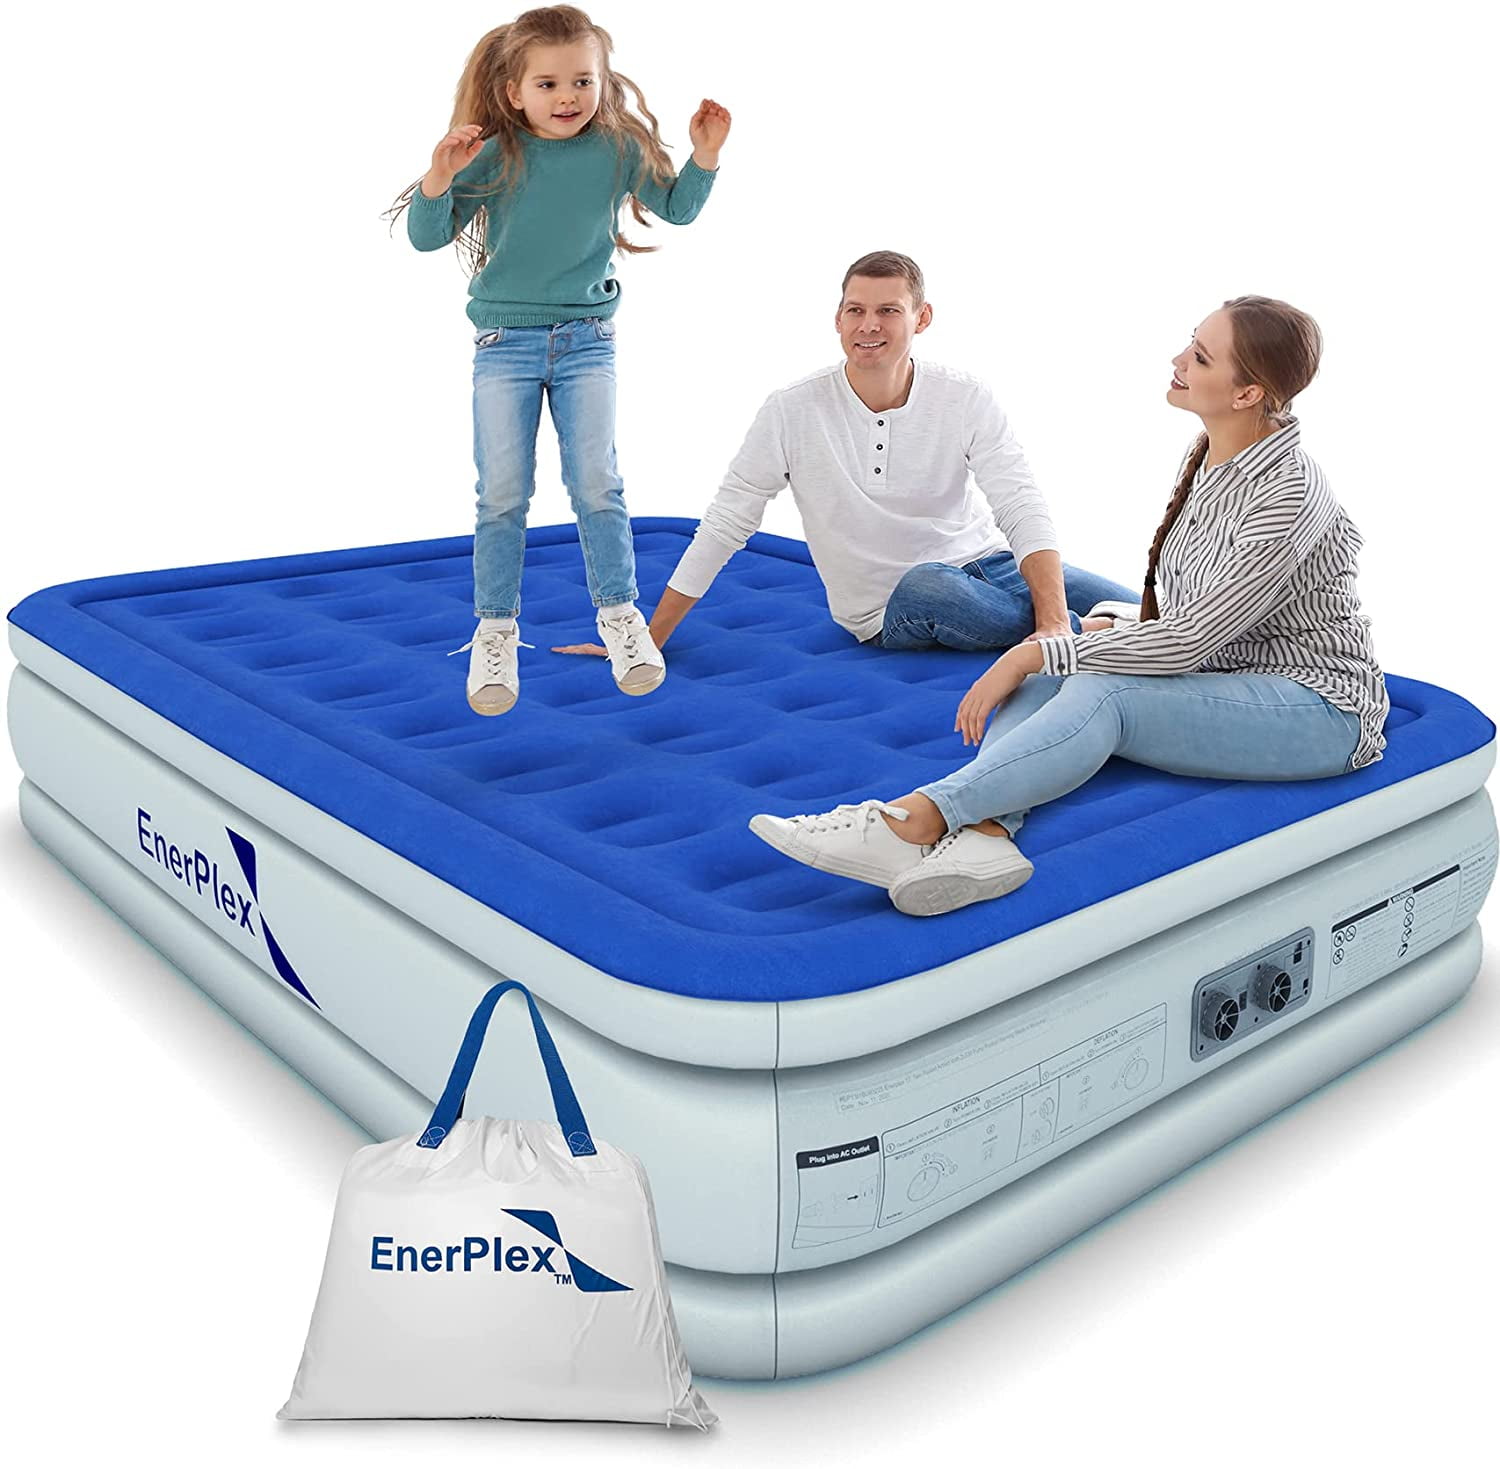 Air bed inflatable flocked and for children jump up c boys blue 